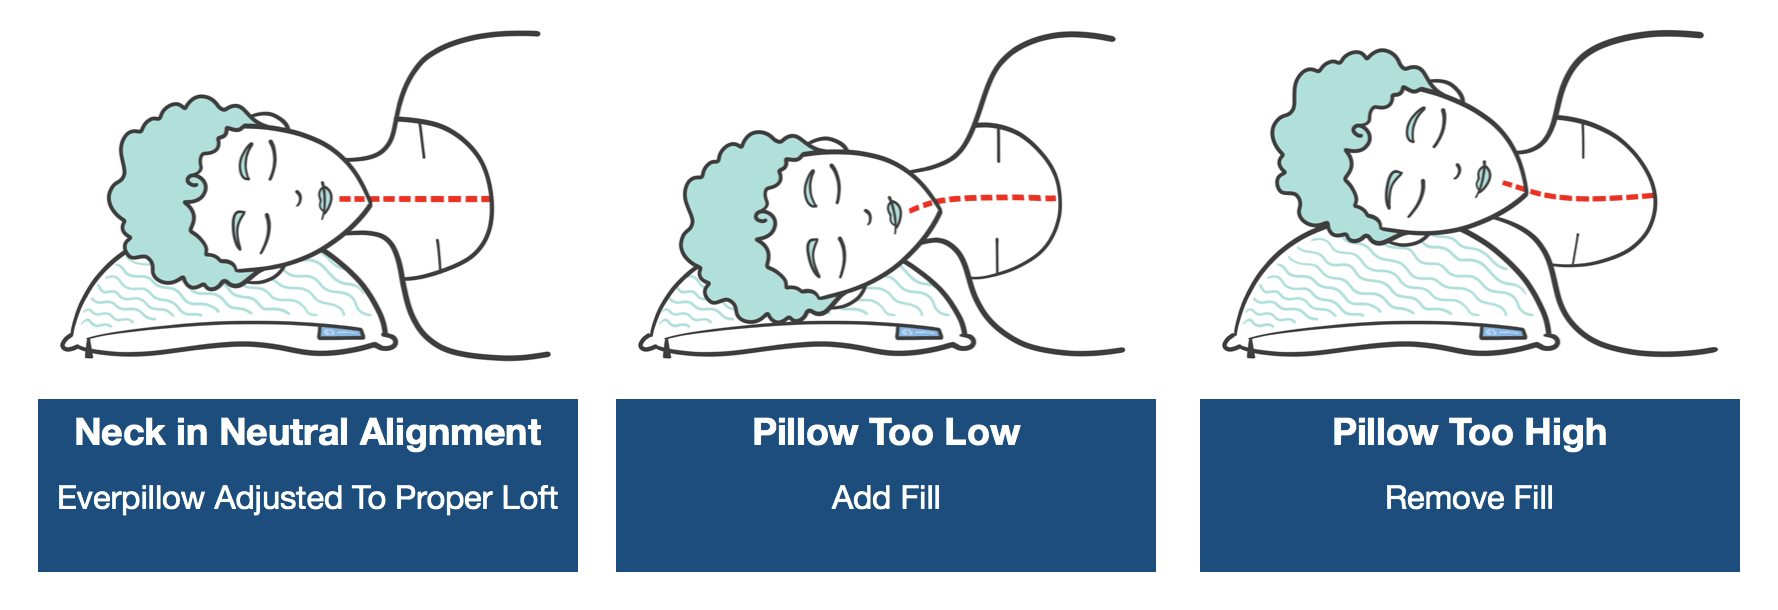 Proper Pillow Use and Neck Alignment